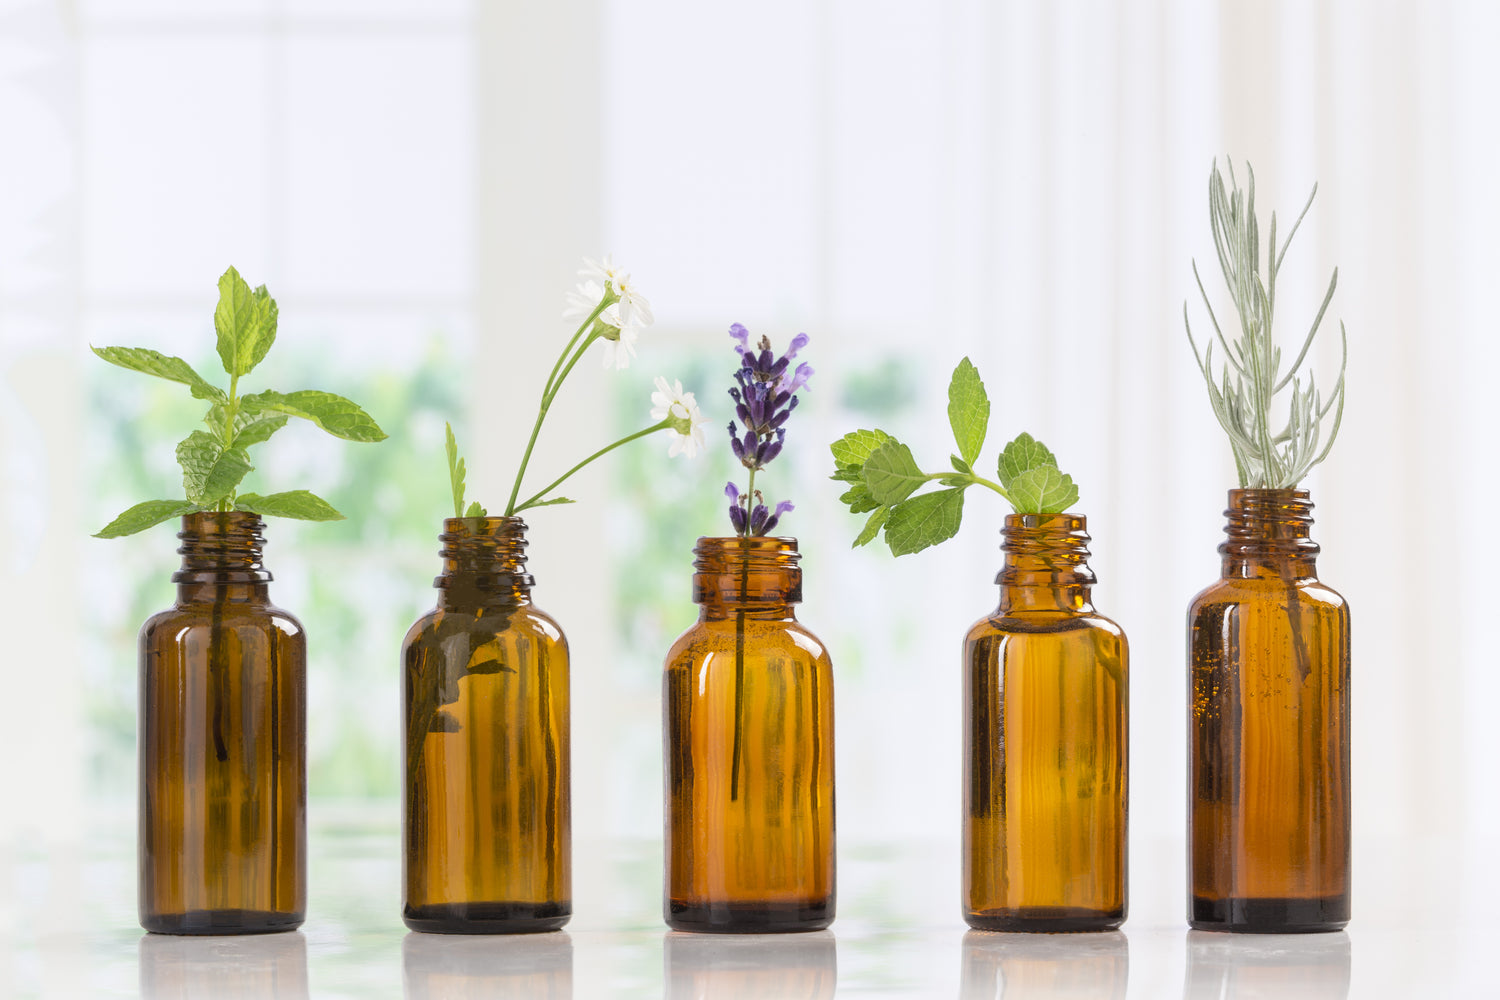 Five essential oil jars are lined up in a row on a white surface. The jars contain a variety of botanicals, including mint, lavender, and rosemary. Essential oils to make you feel good, improve health, and get you in the mood. 